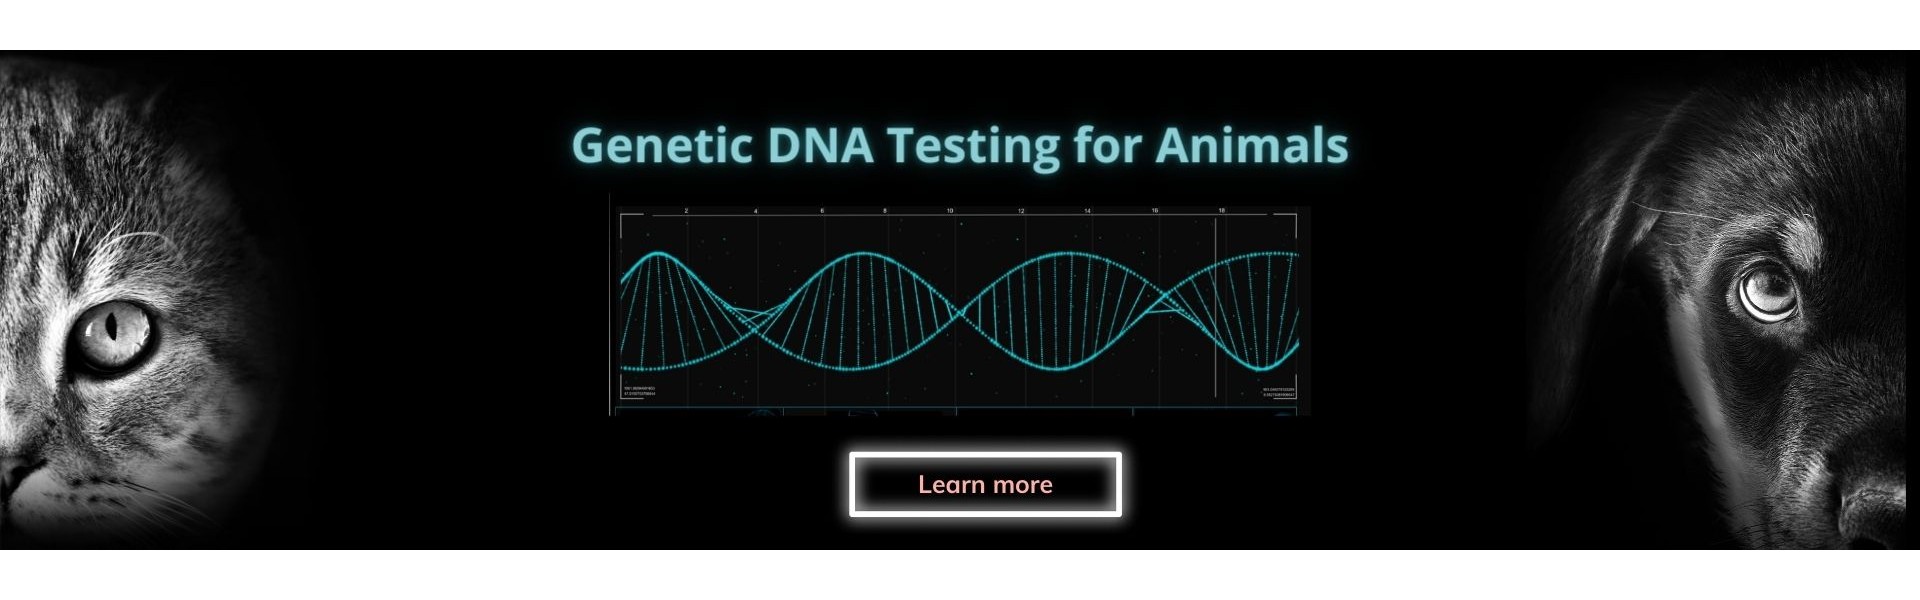 Genetic DNA testing cat and dog